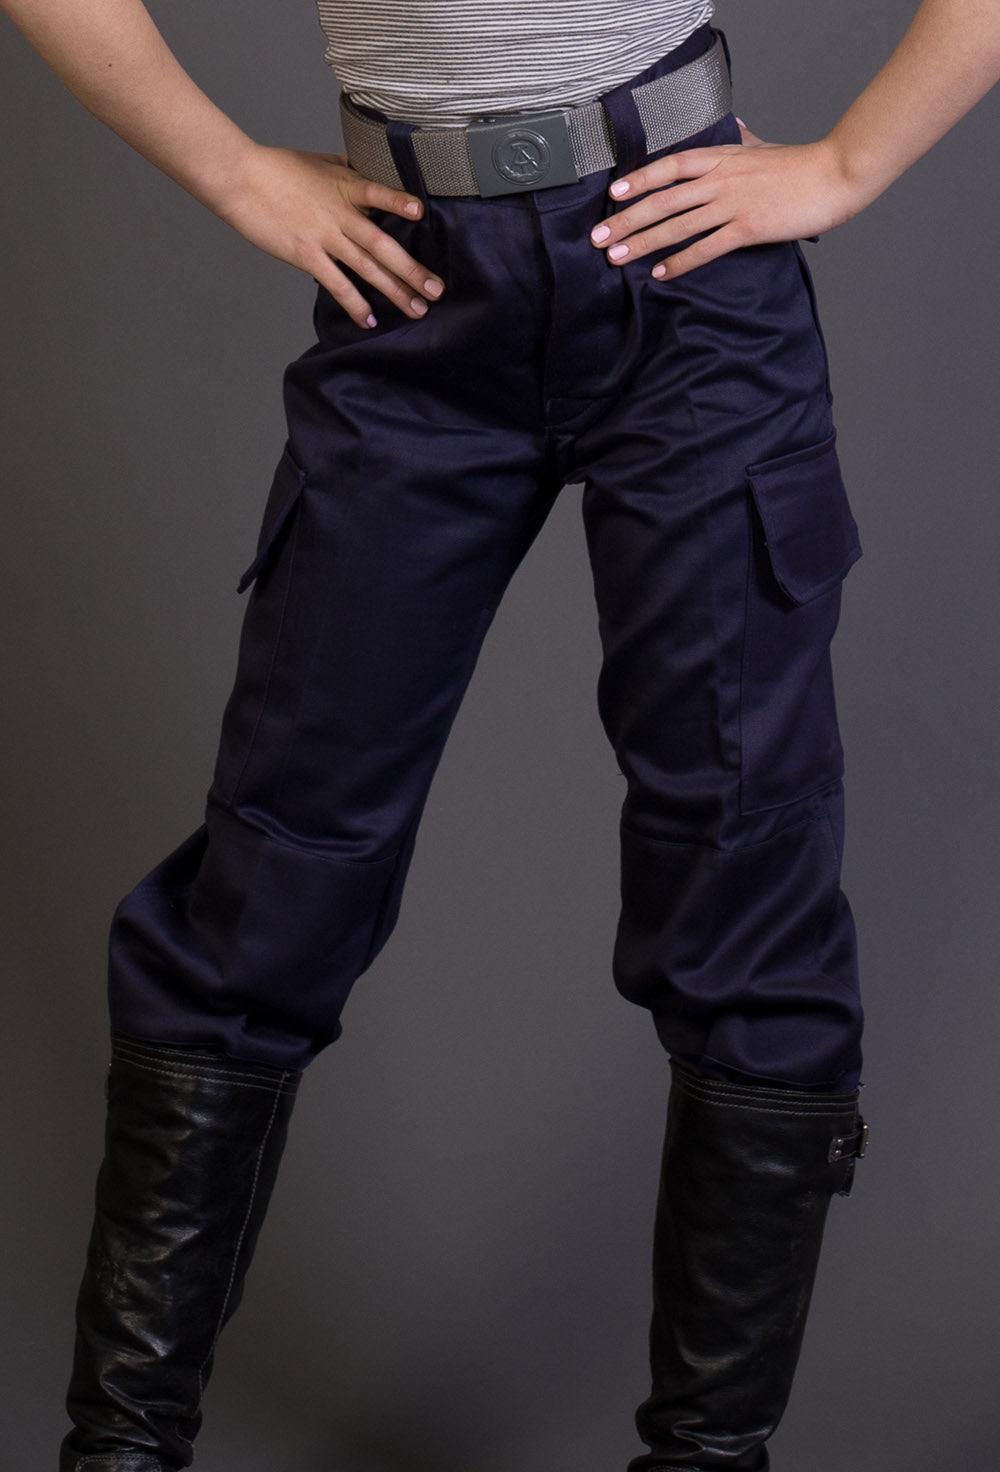 Tactical Utility Cargo Pants  Streetwear at Before the High Street